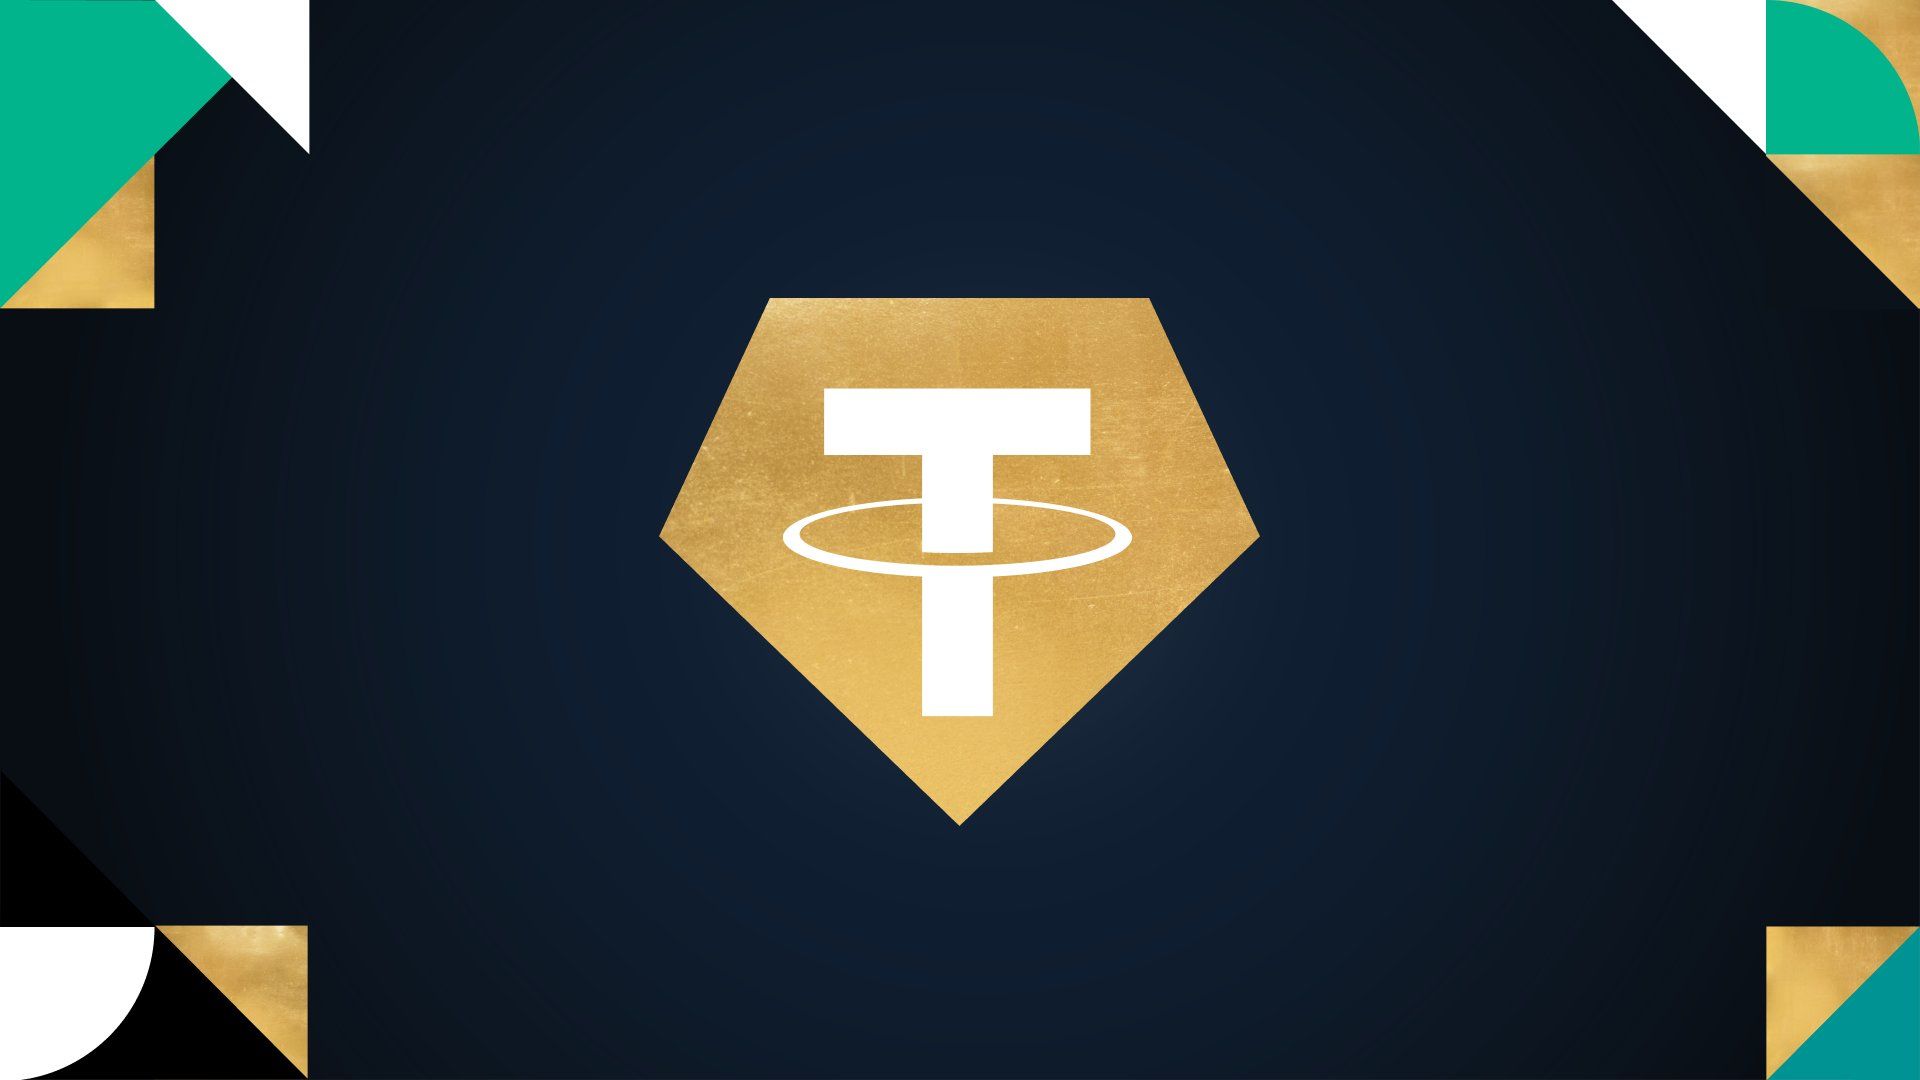 Twitter image of Tether currency logo, a 'T' in gold